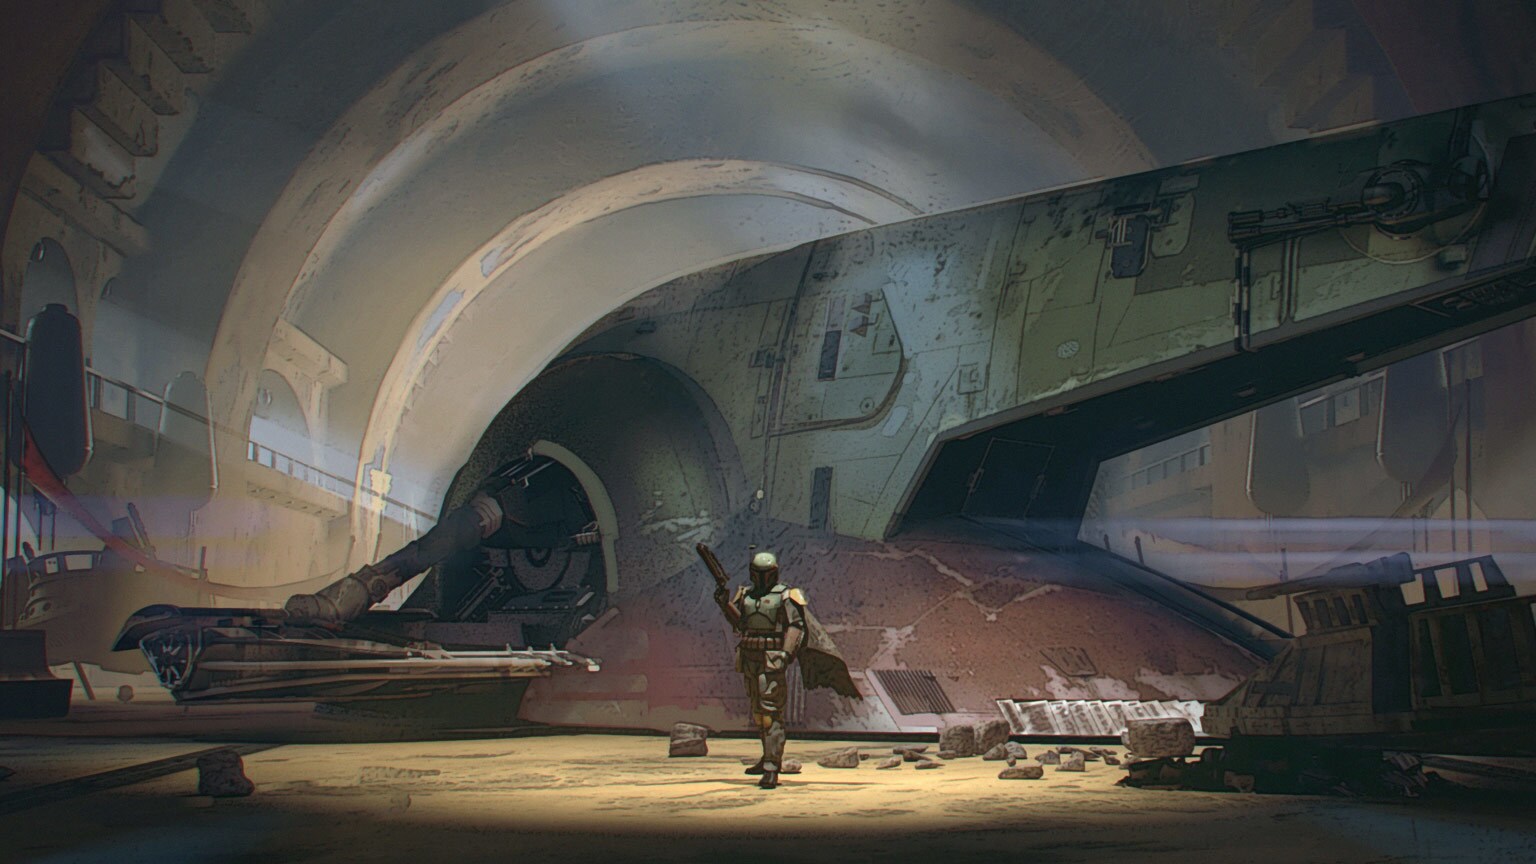 The Book of Boba Fett Cargo Hold: “Chapter 4: The Gathering Storm”